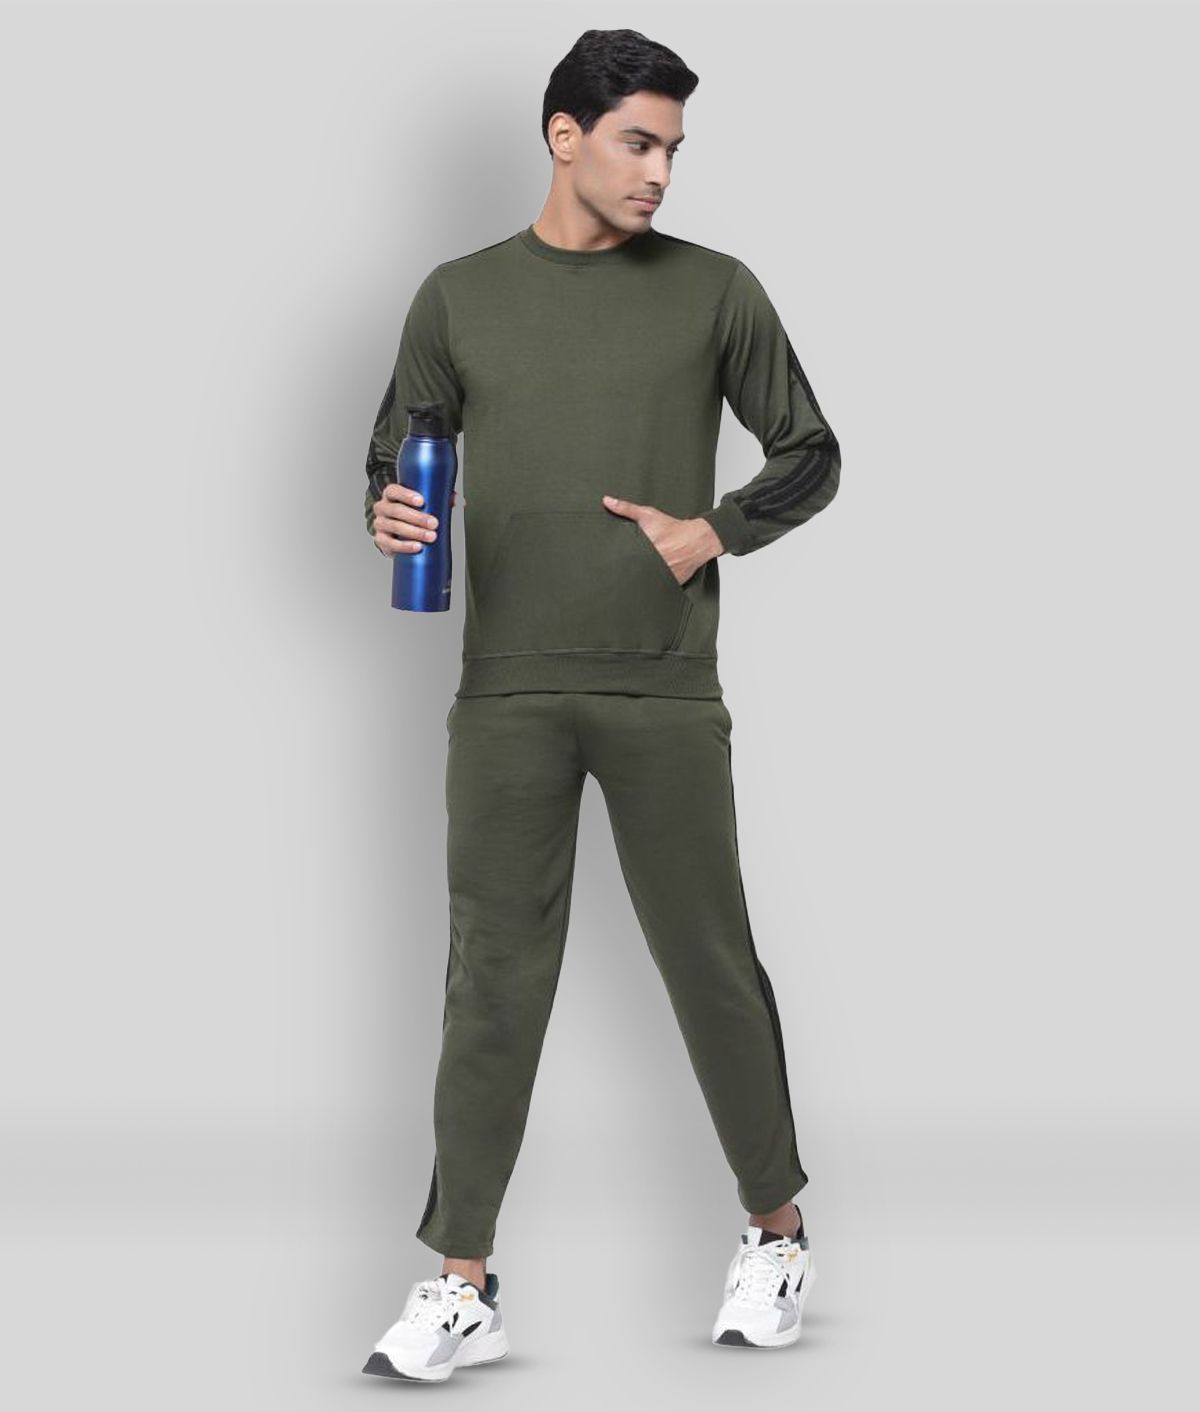 KZALCON - Olive Cotton Blend Regular Fit Solid Men's Sports Tracksuit ( Pack of 1 )